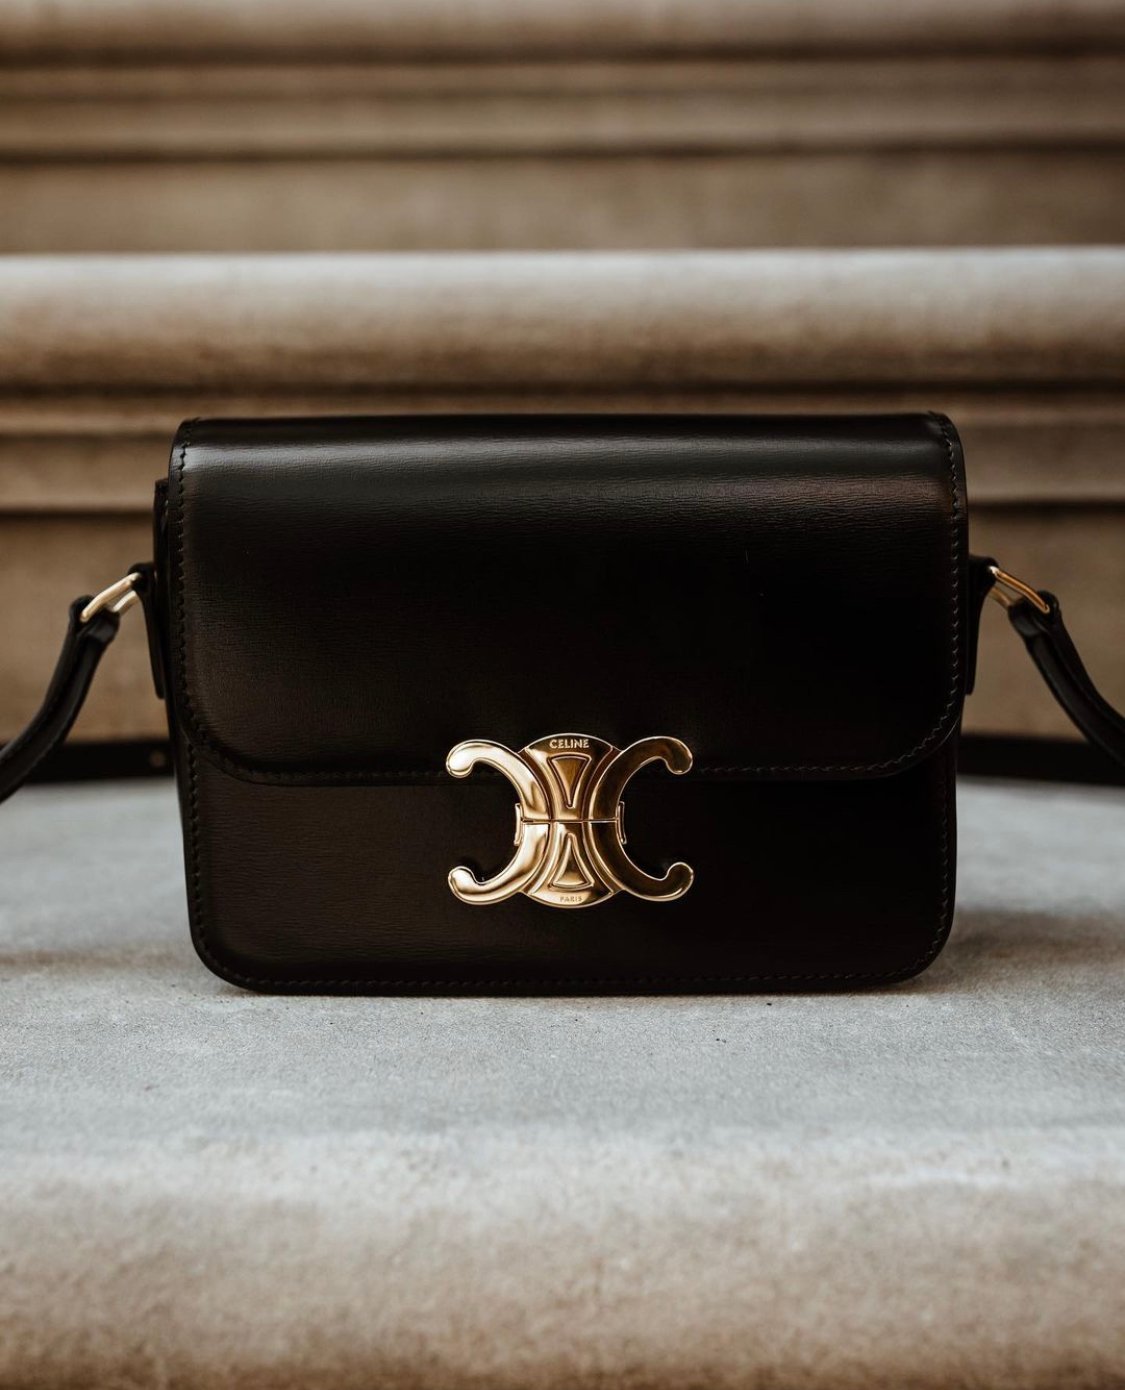 Top 5 Most Sought-after Classic Old Celine Bags